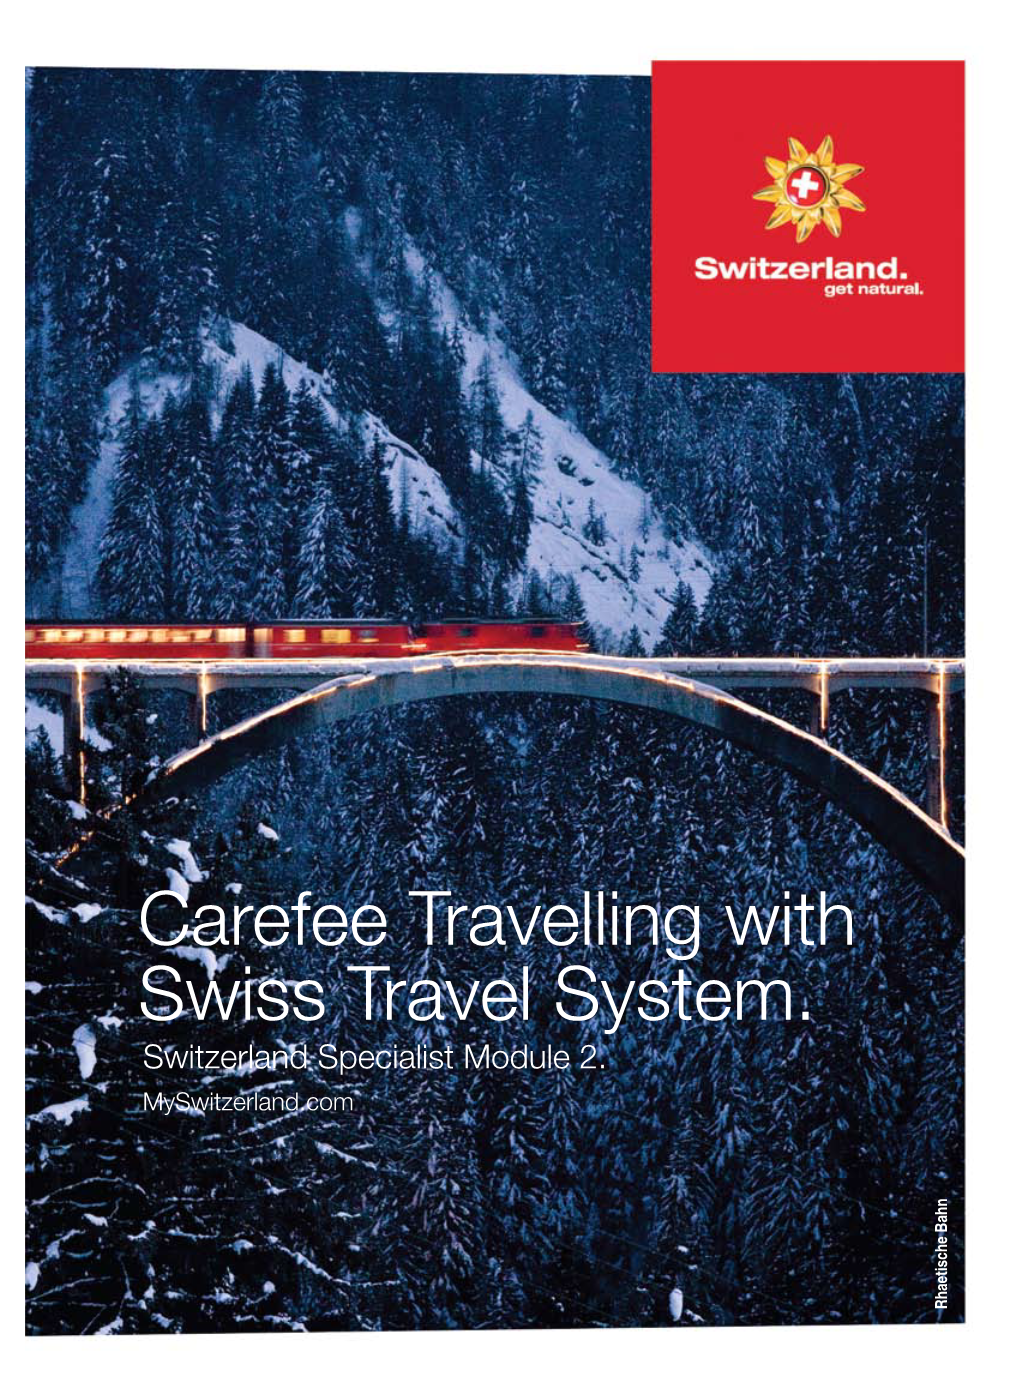 Carefee Travelling with Swiss Travel System. Switzerland Specialist Module 2